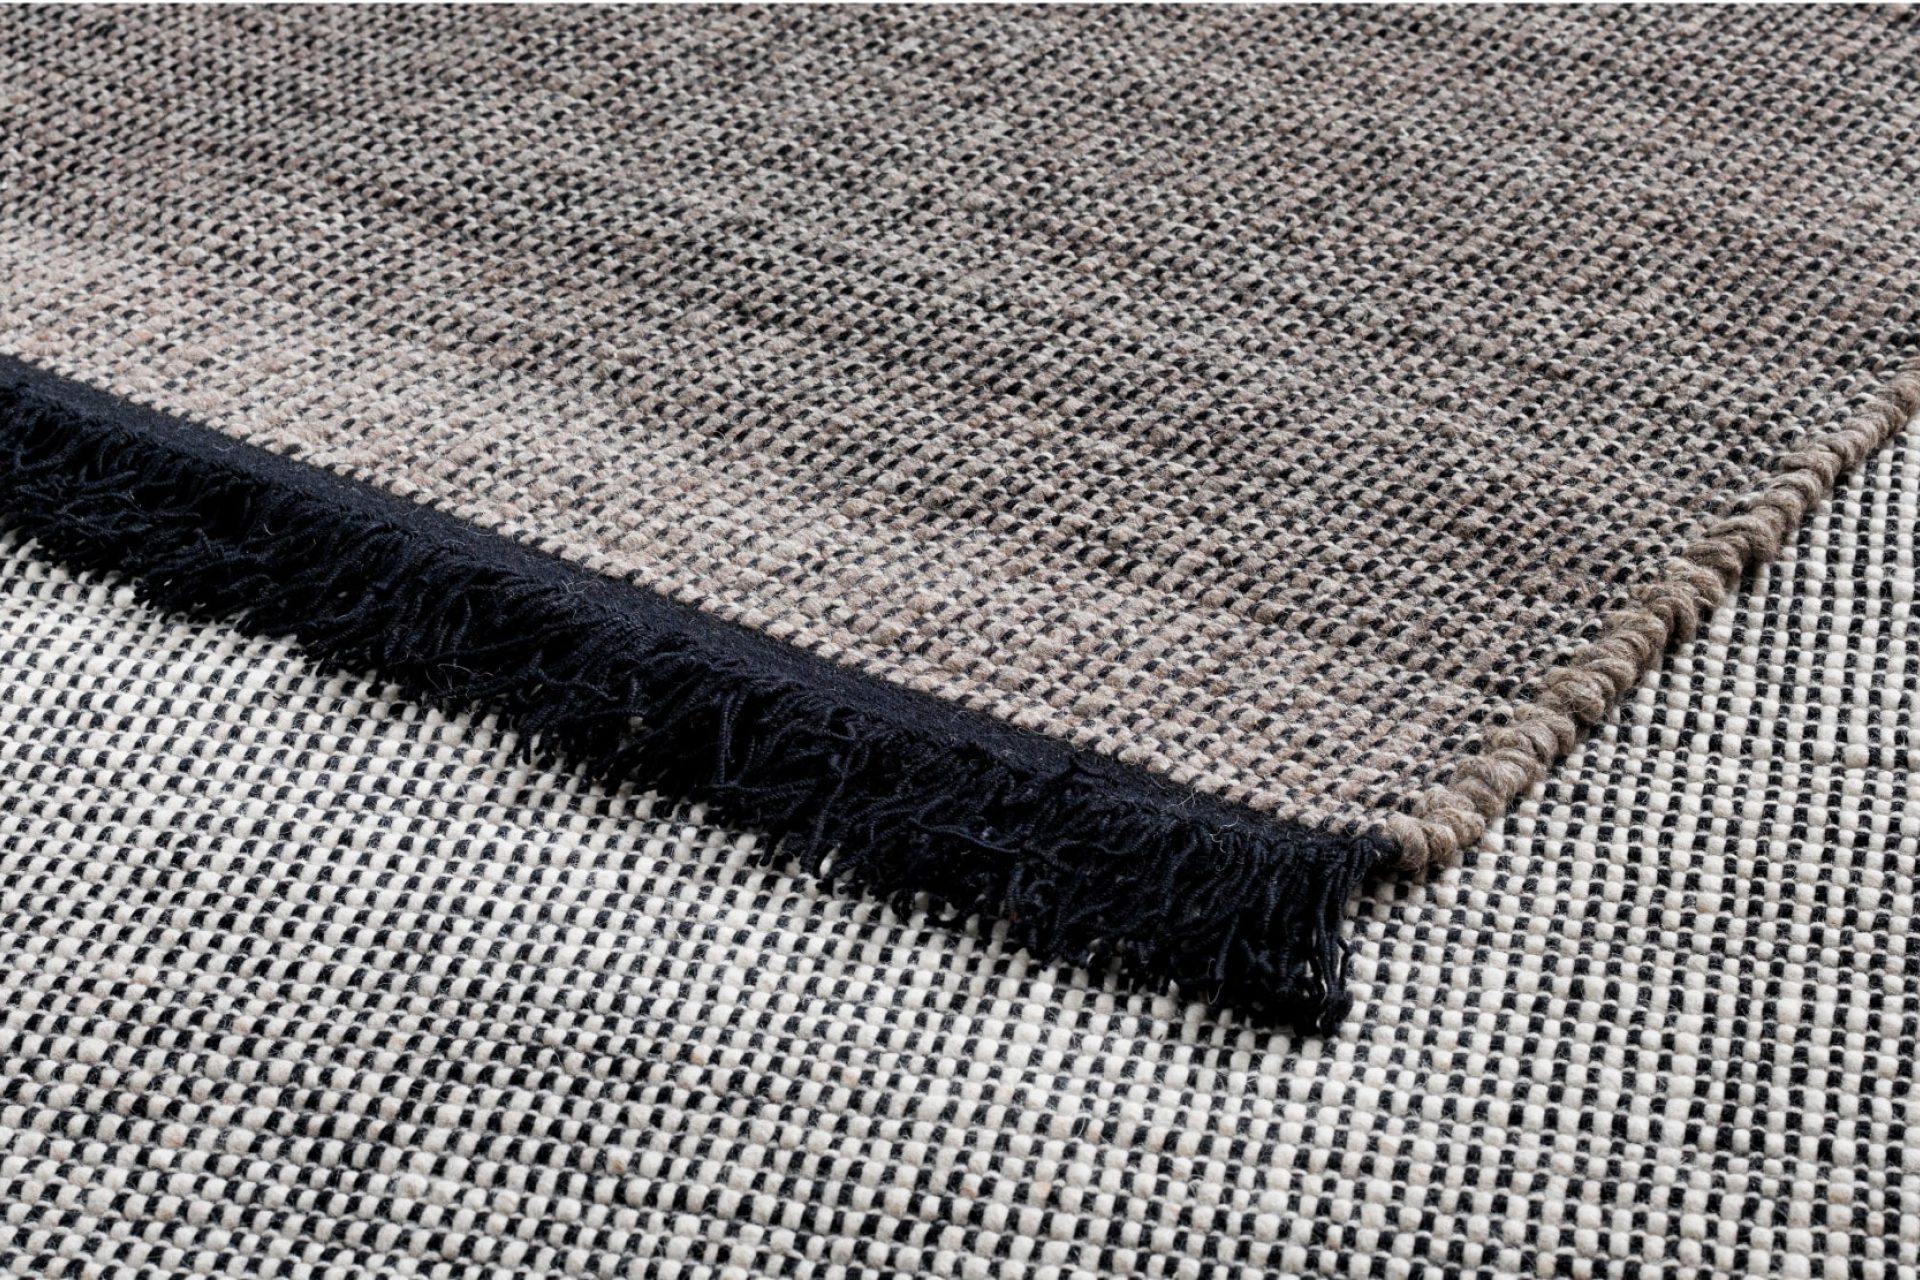 Display showing two parts of high-end, high-quality rugs